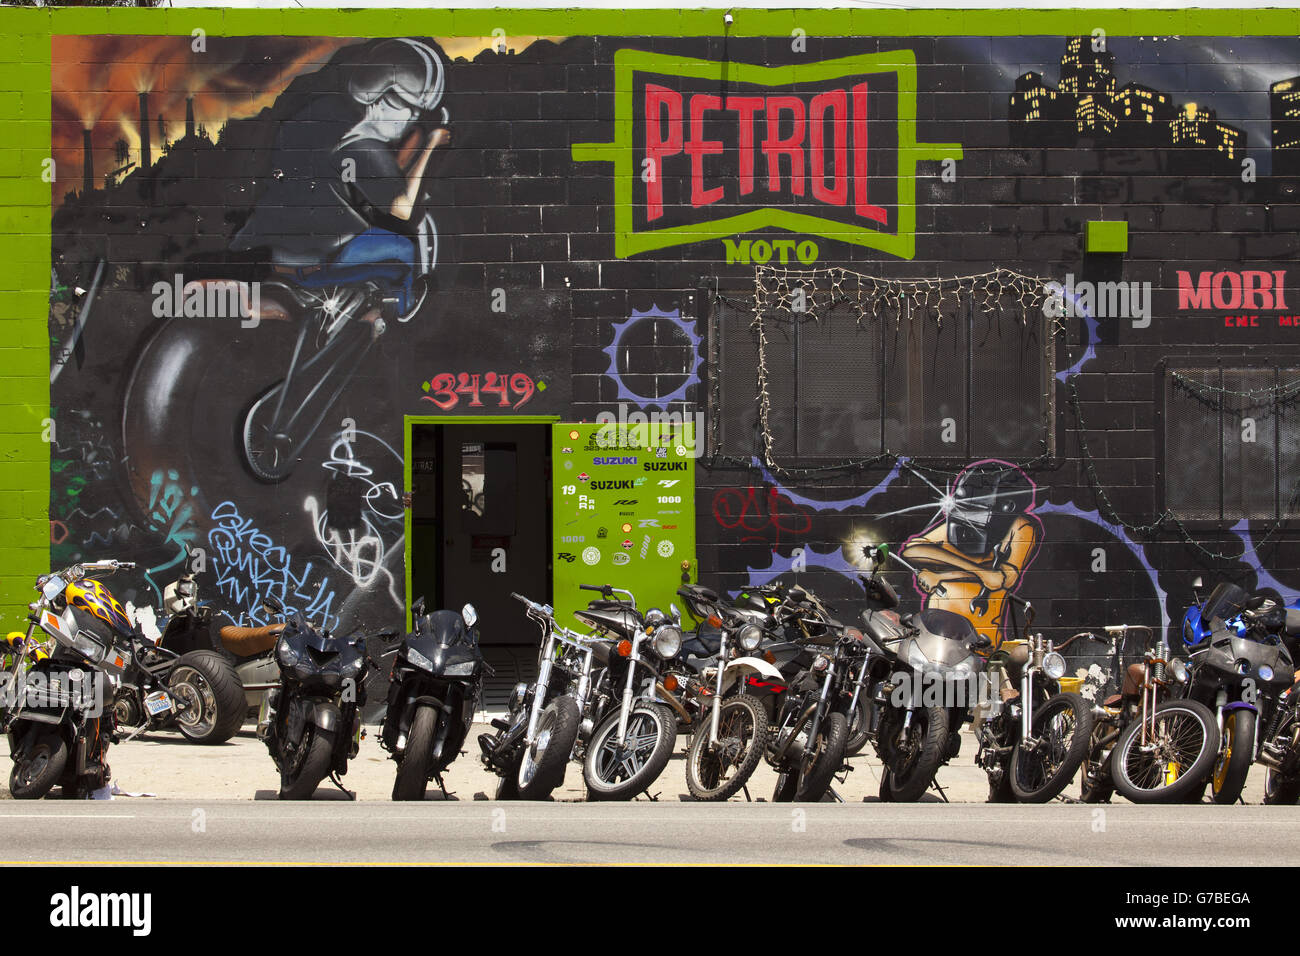 Petrol Moto motorcycle shop, Olympic Blvd. East Los Angeles, California,  United States of America Stock Photo - Alamy